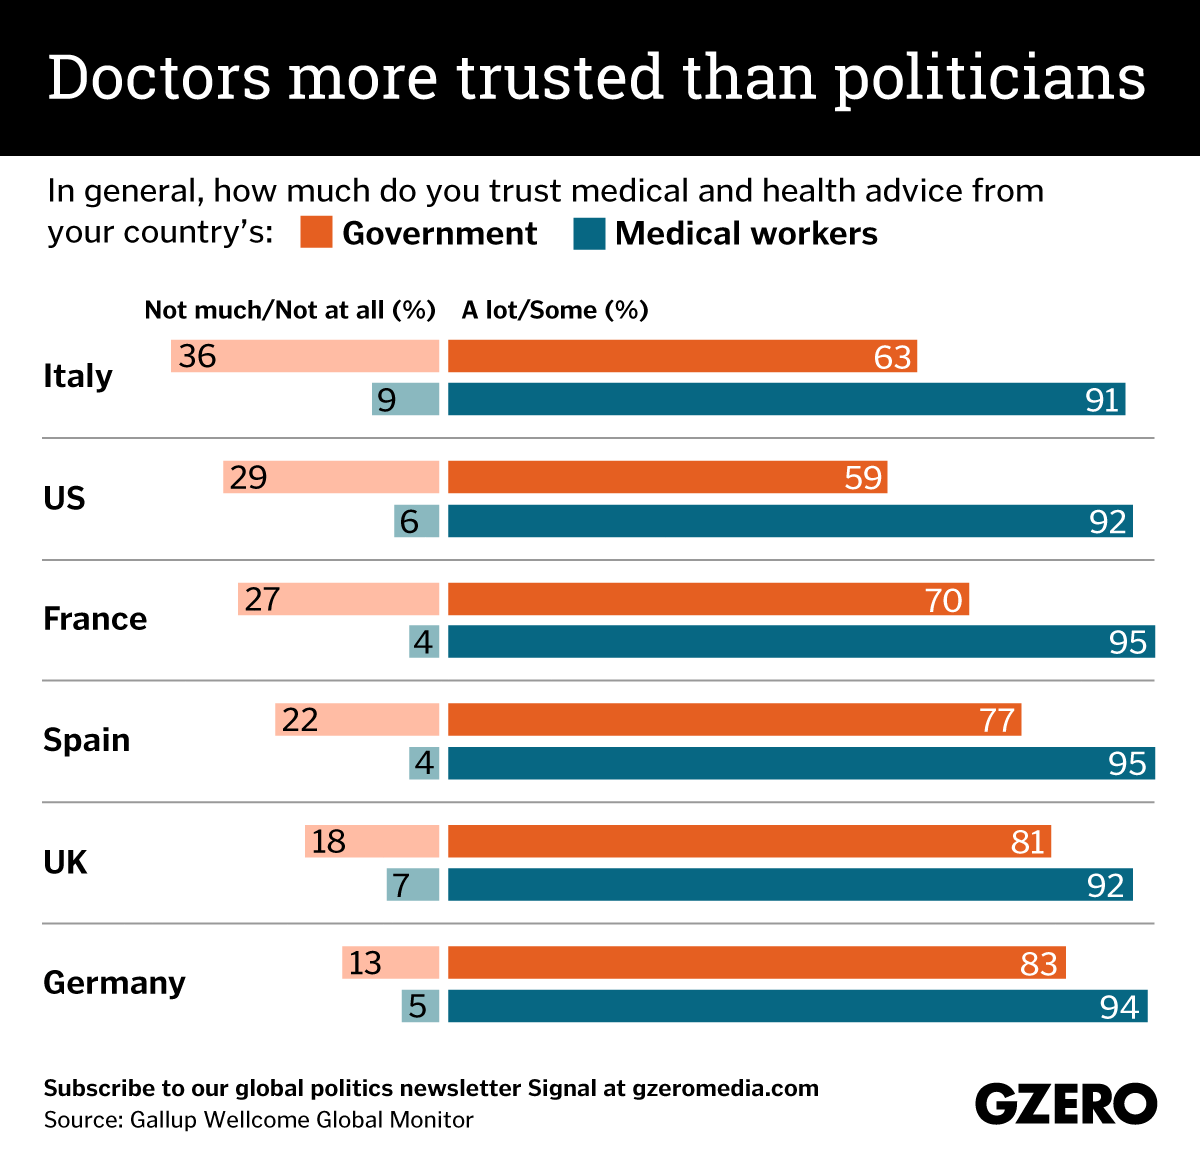 The Graphic Truth: Doctors more trusted than politicians